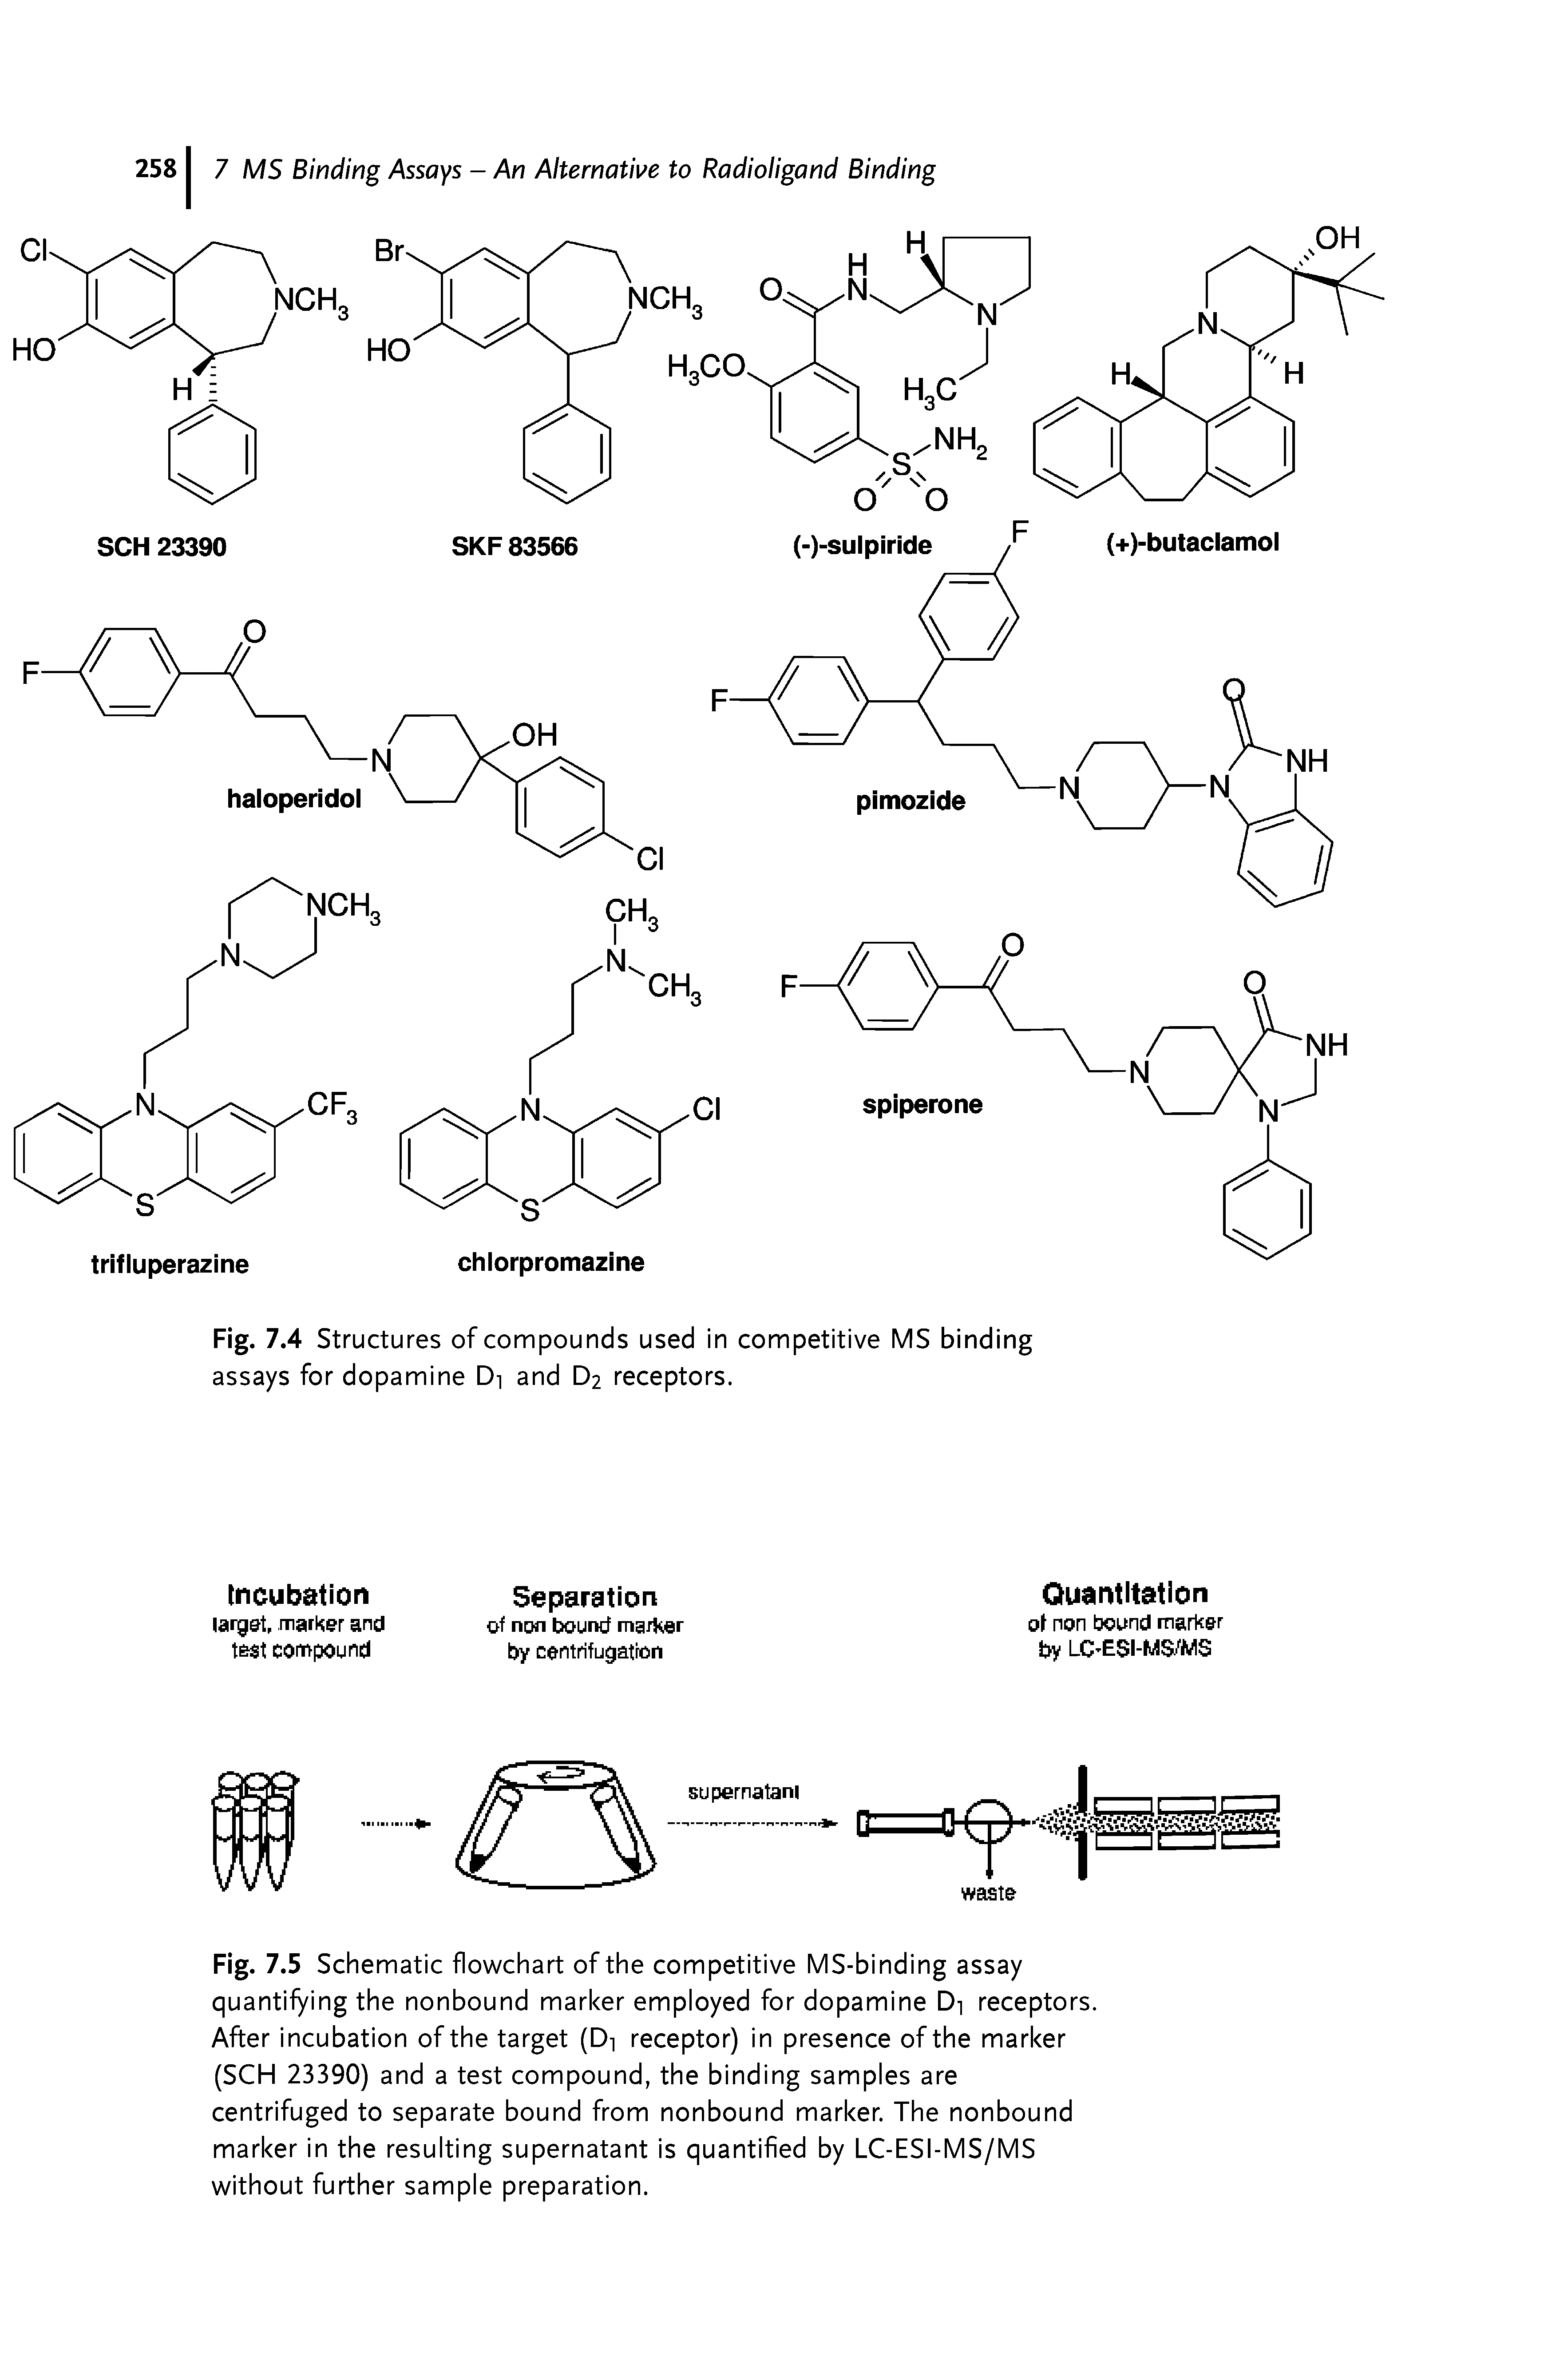 Fig. 7.4 Structures of compounds used in competitive MS binding assays for dopamine Di and D2 receptors.